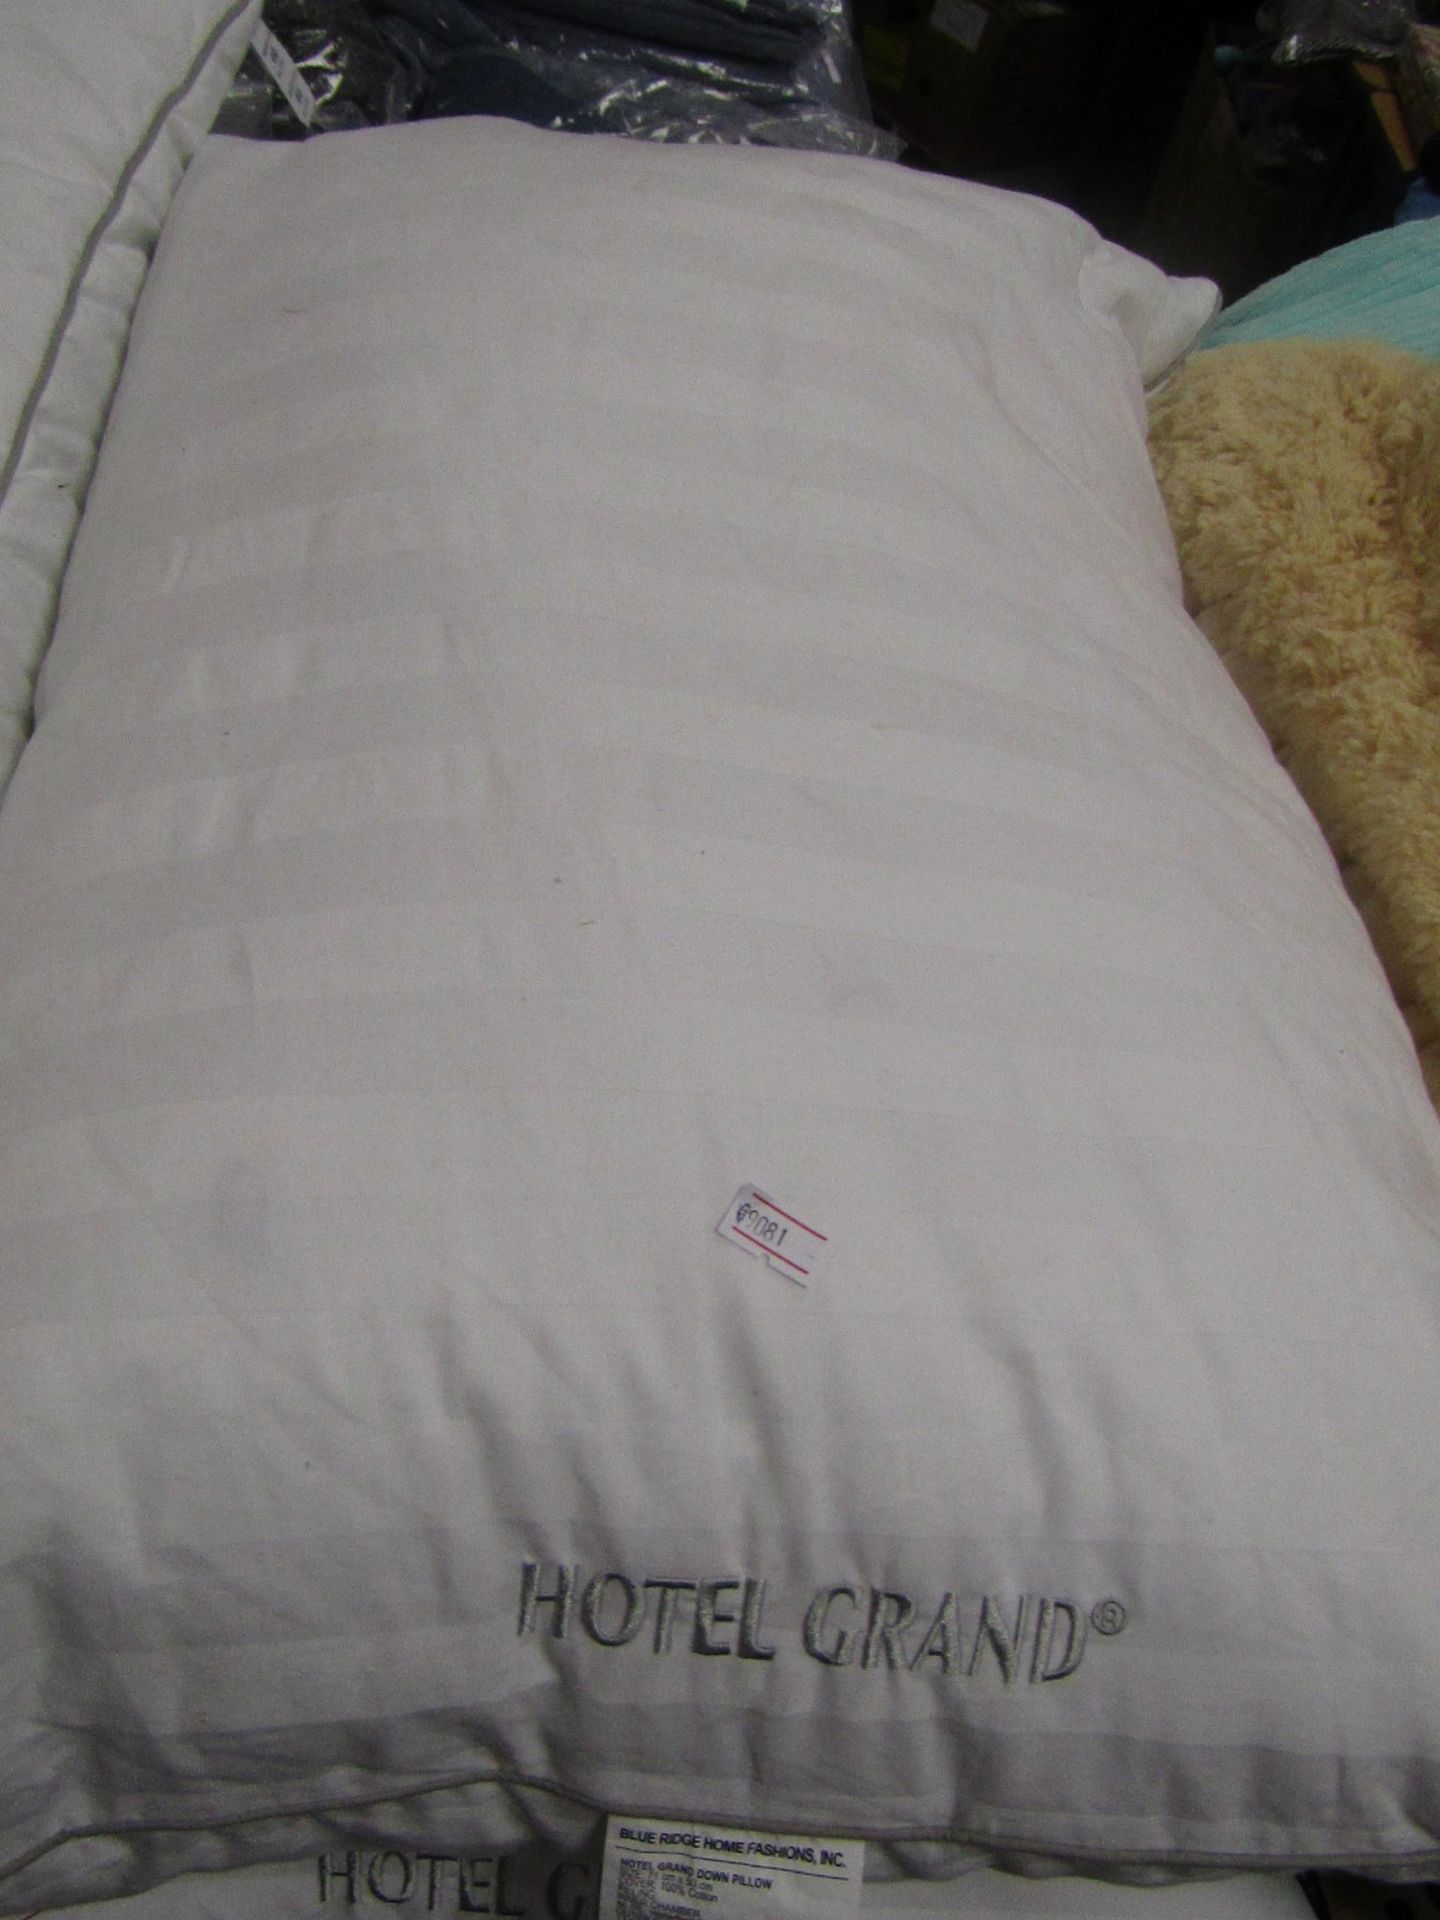 2X Hotel Grand 71cmX50cm Waterfowl Feathers & Down pillows no packaging may have marks on